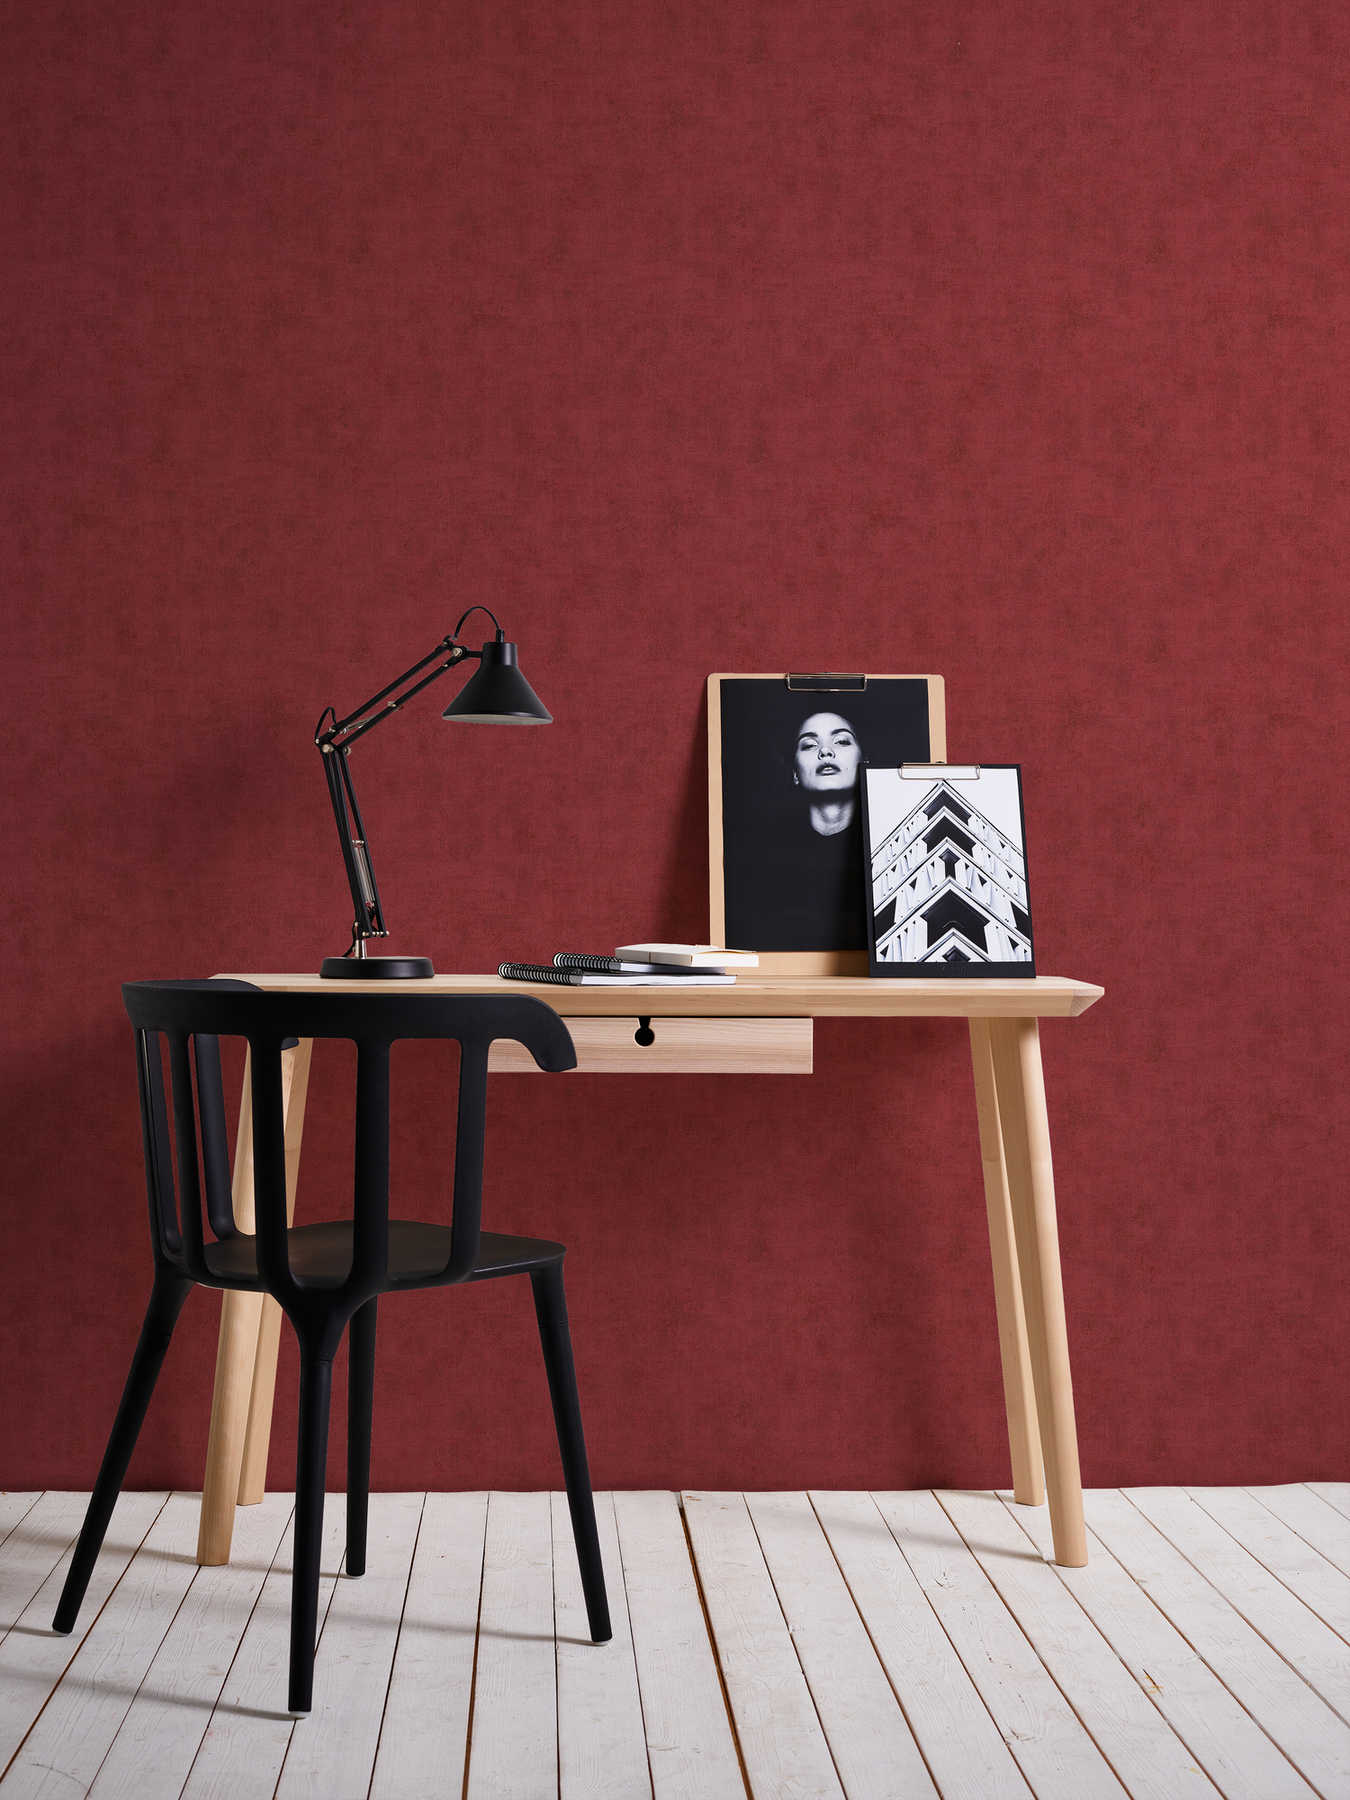             Plain wallpaper with mottled structure look - red
        